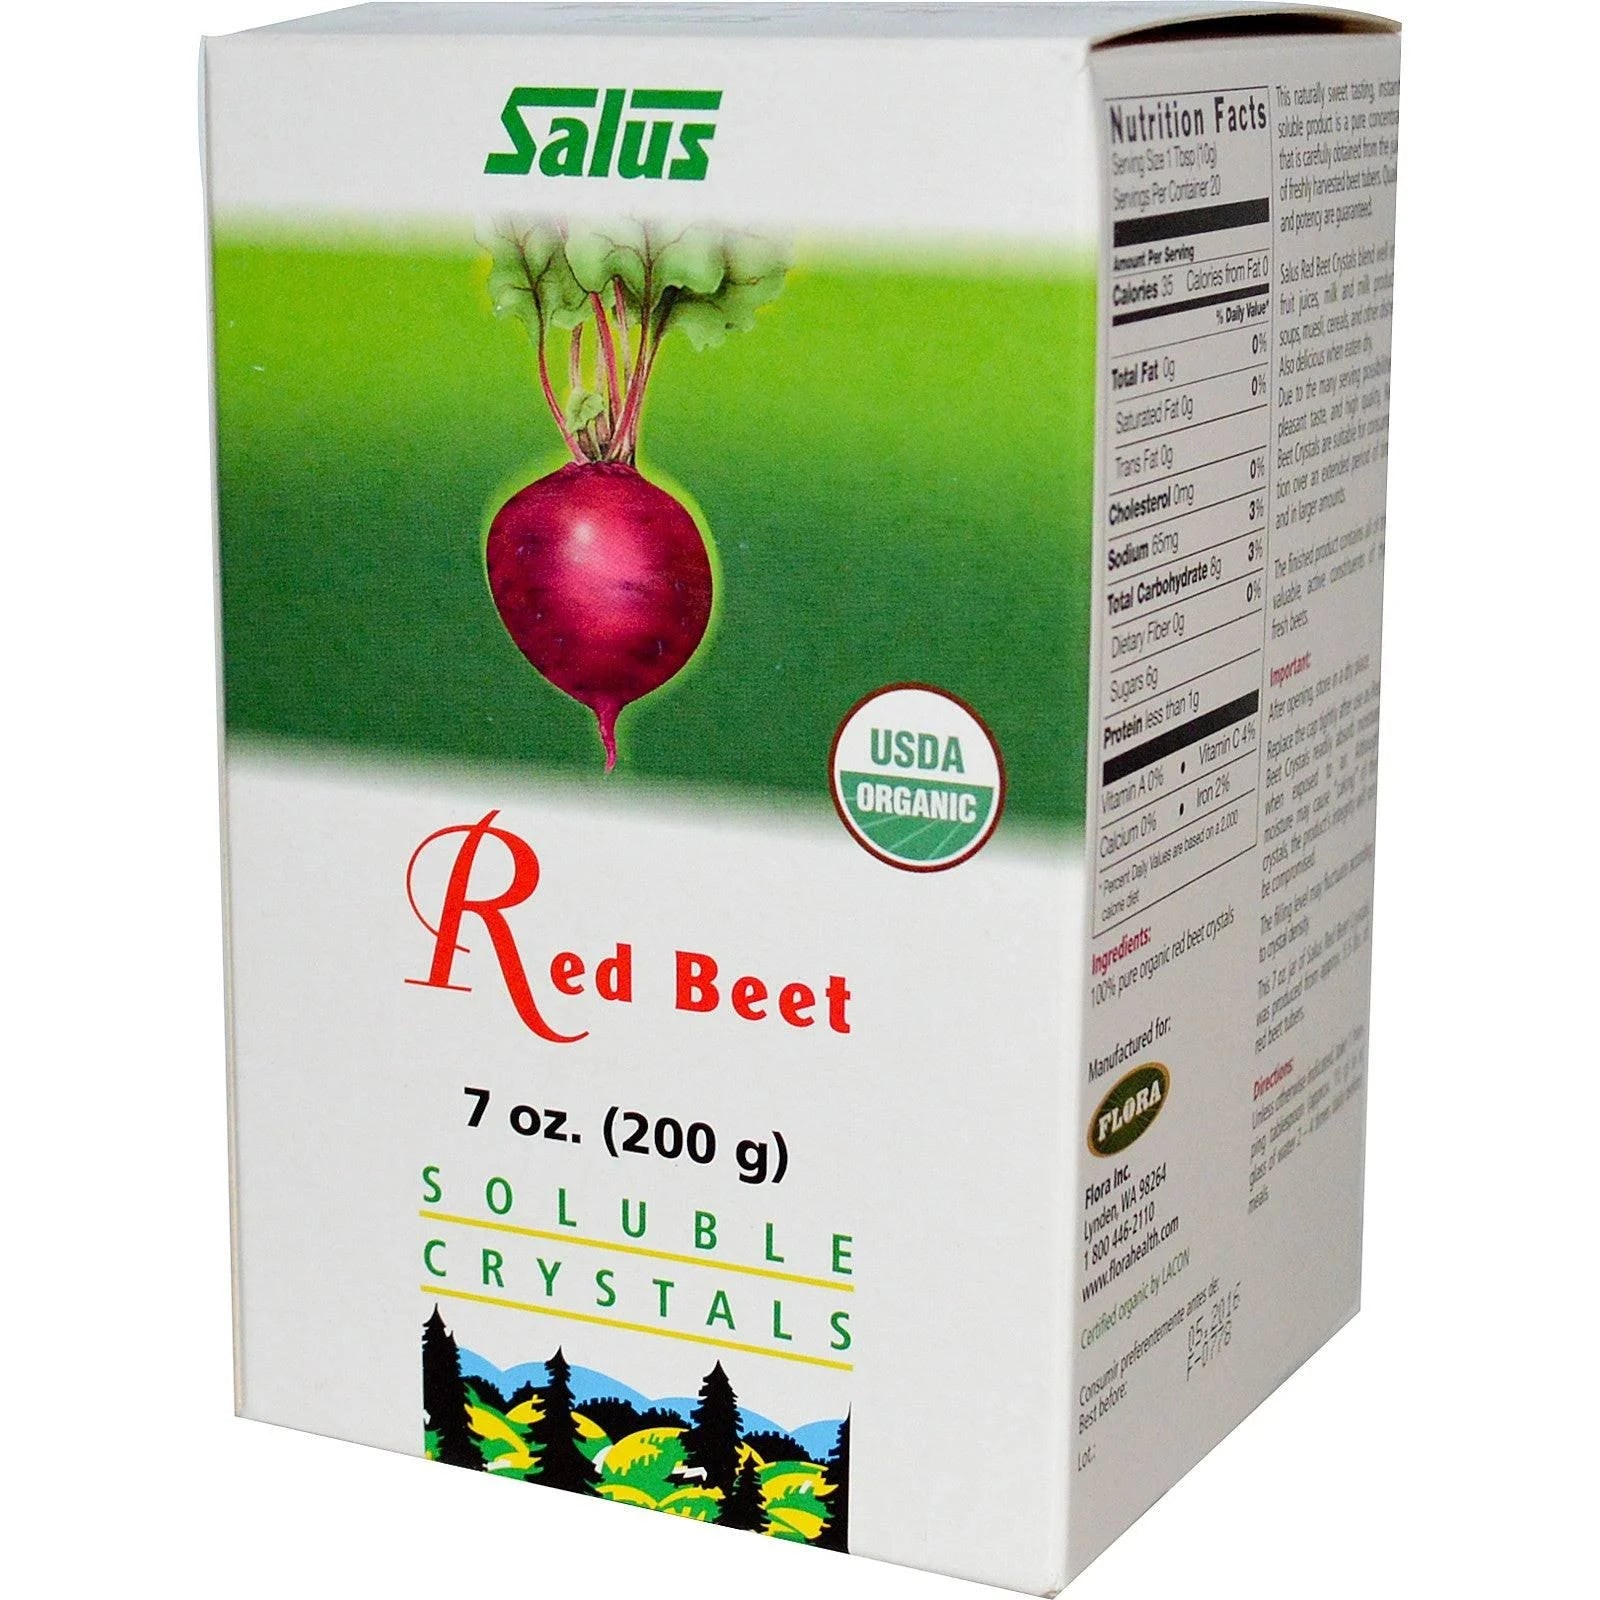 Red Beet Crystals by Salus, 200g